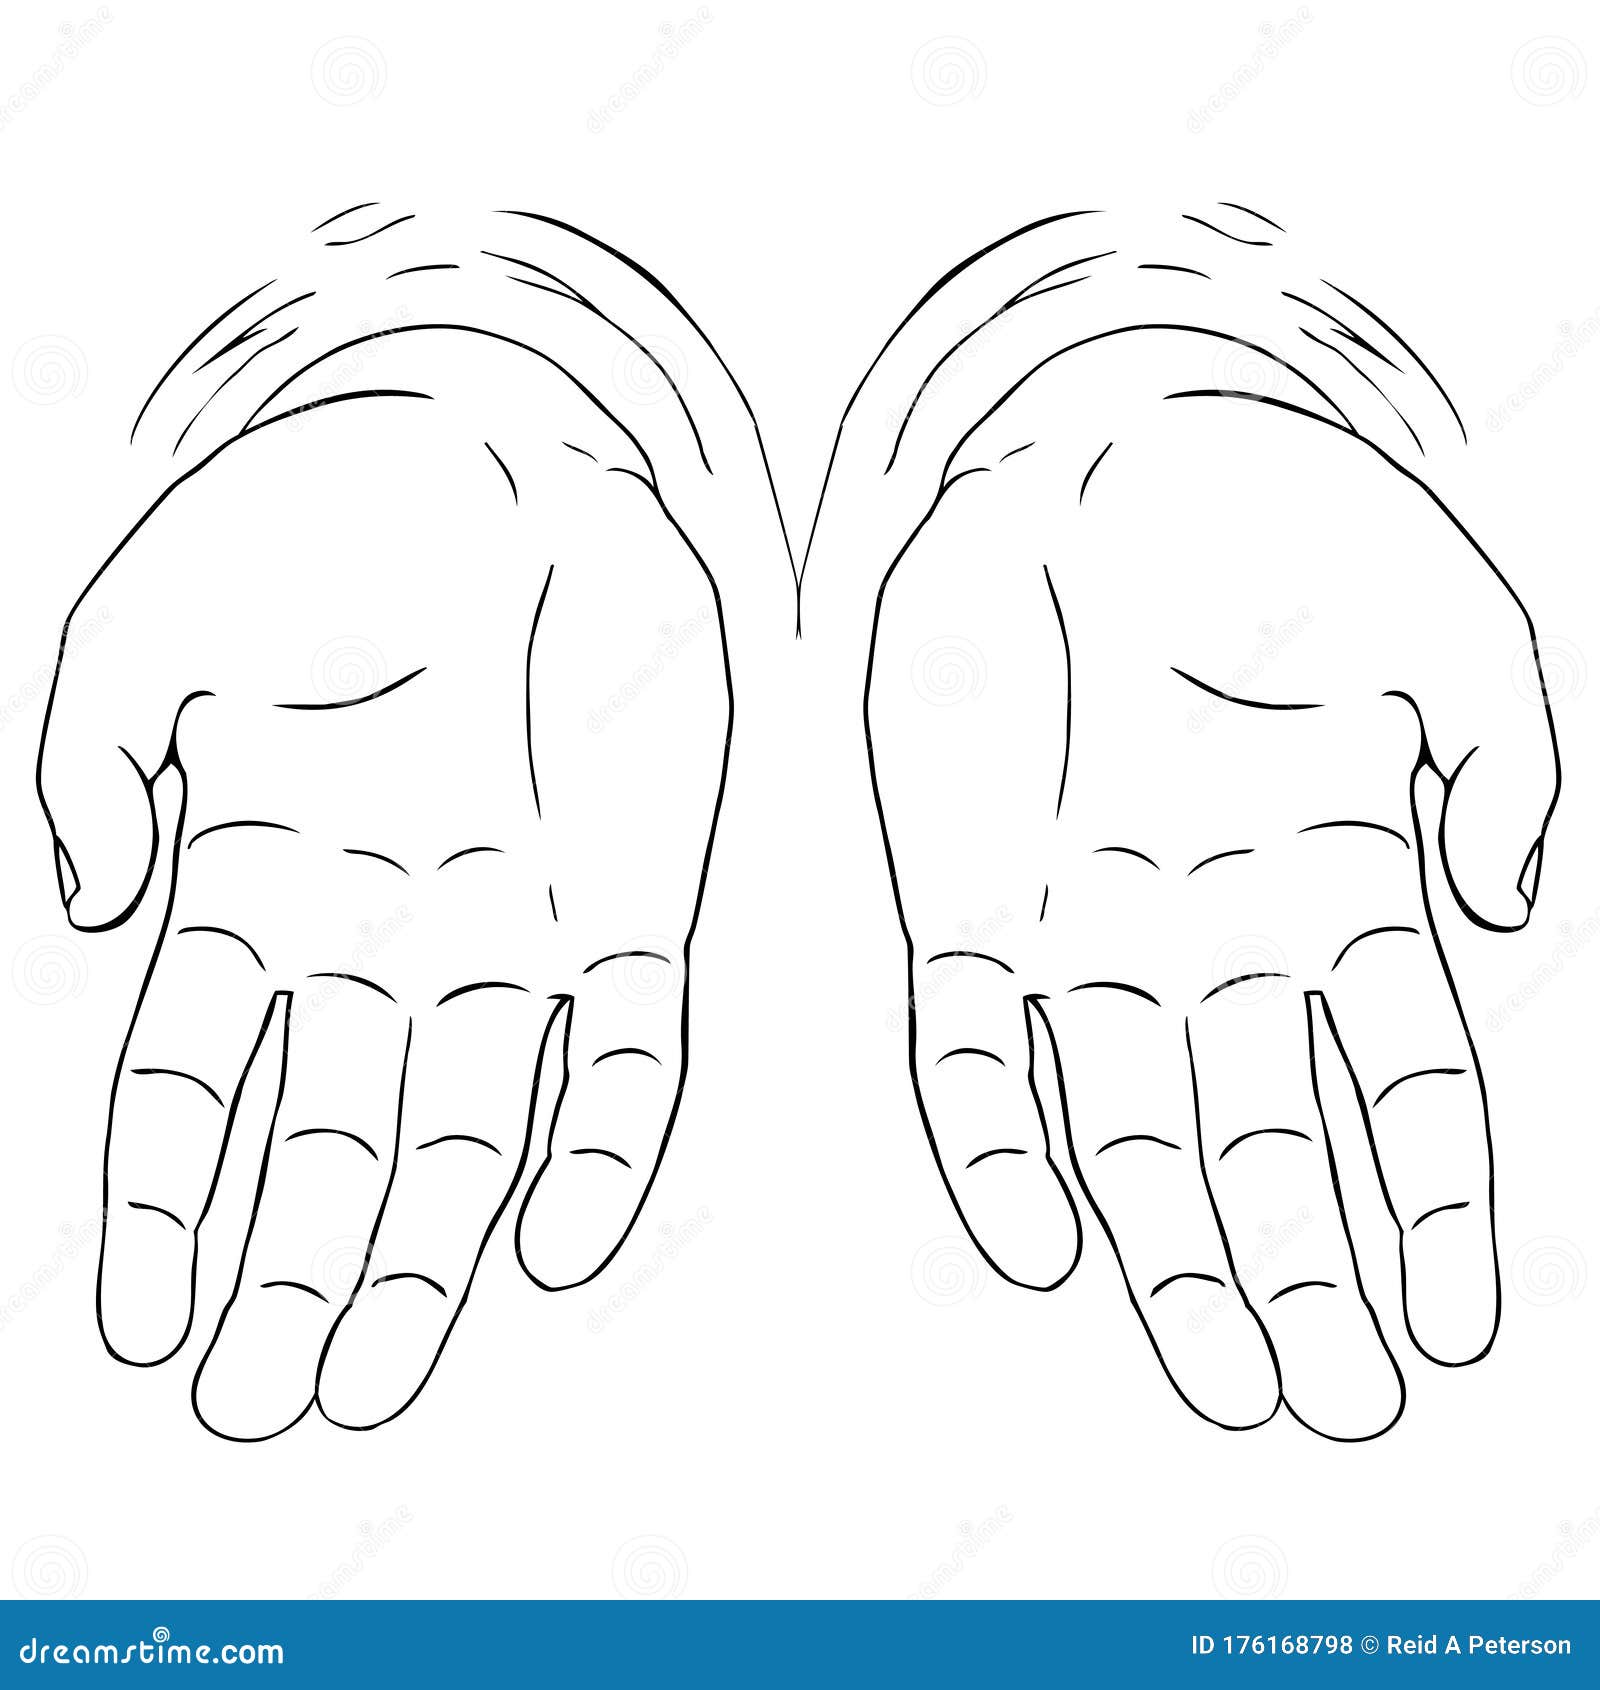 two-hands-palms-open-extended-illustration-design-black-white-isolated-drawing